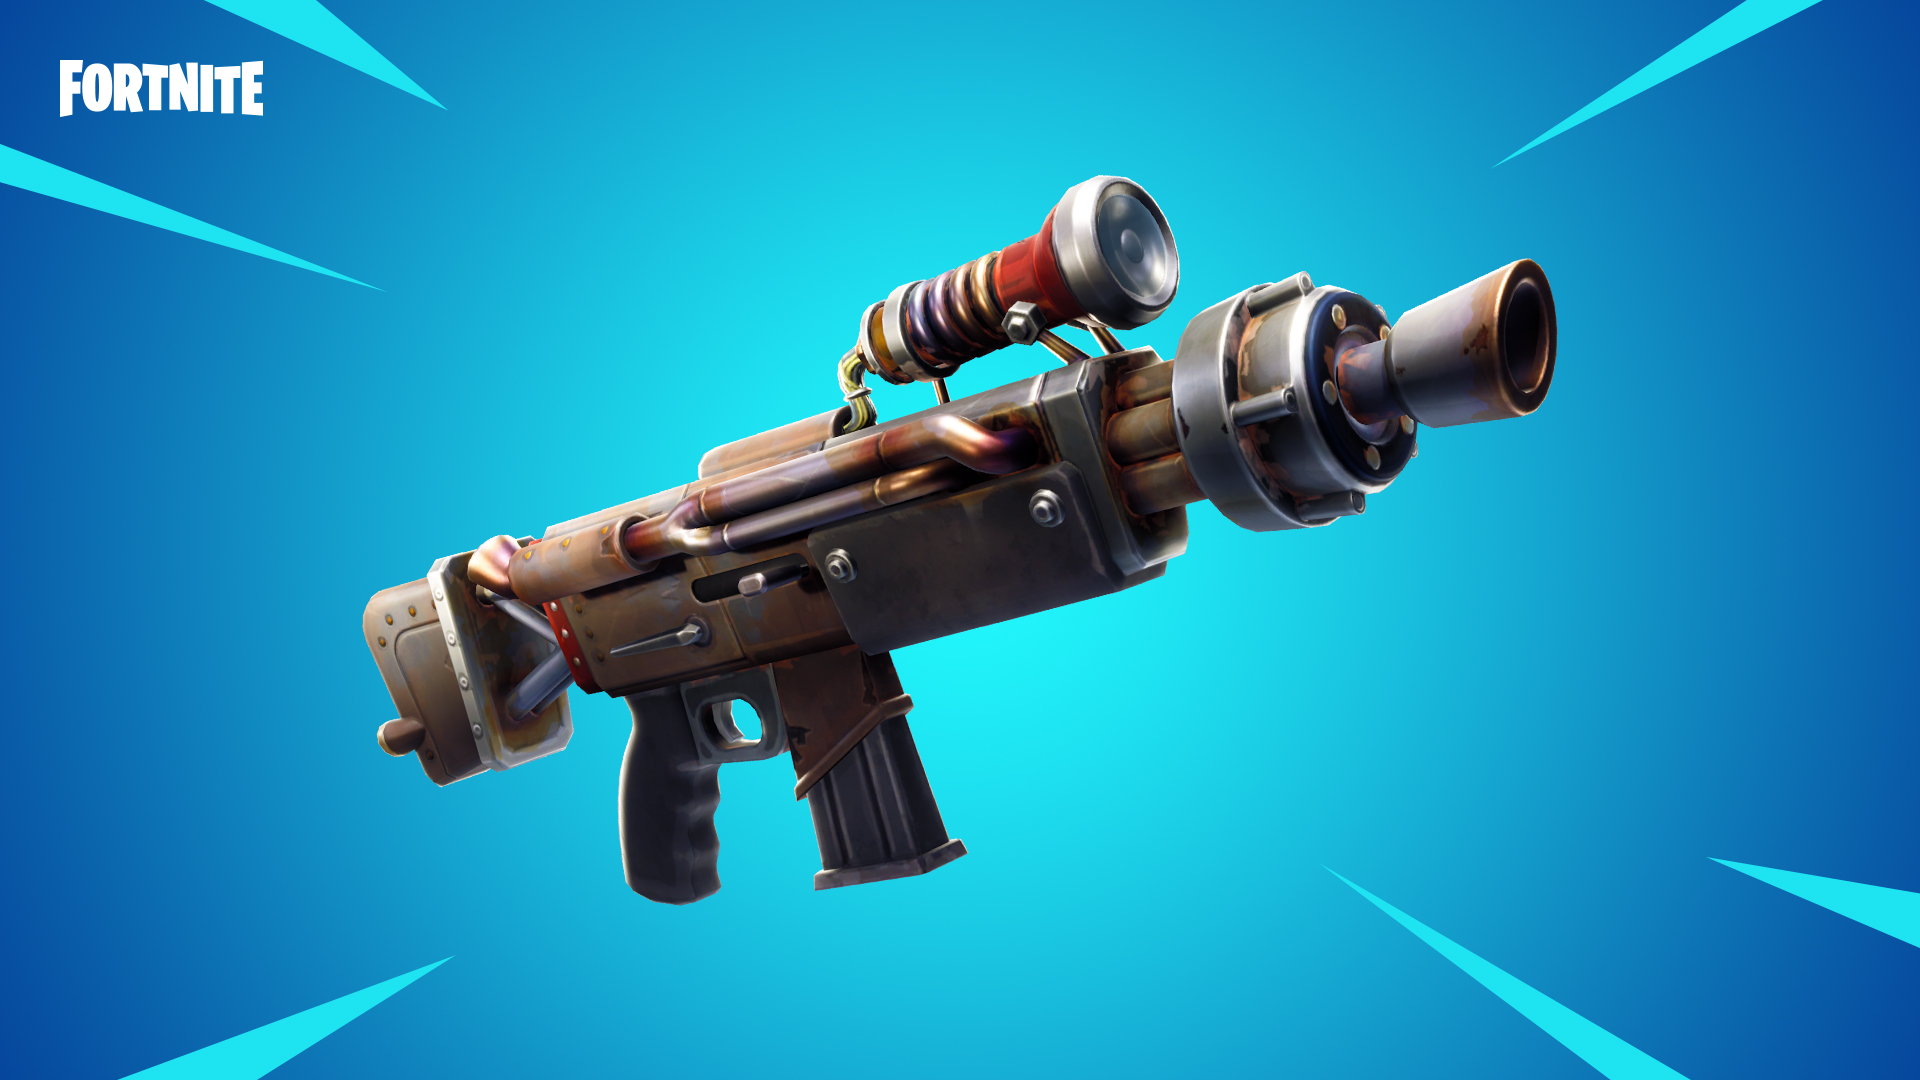 right click view image for full resolution - fortnite terminator any good